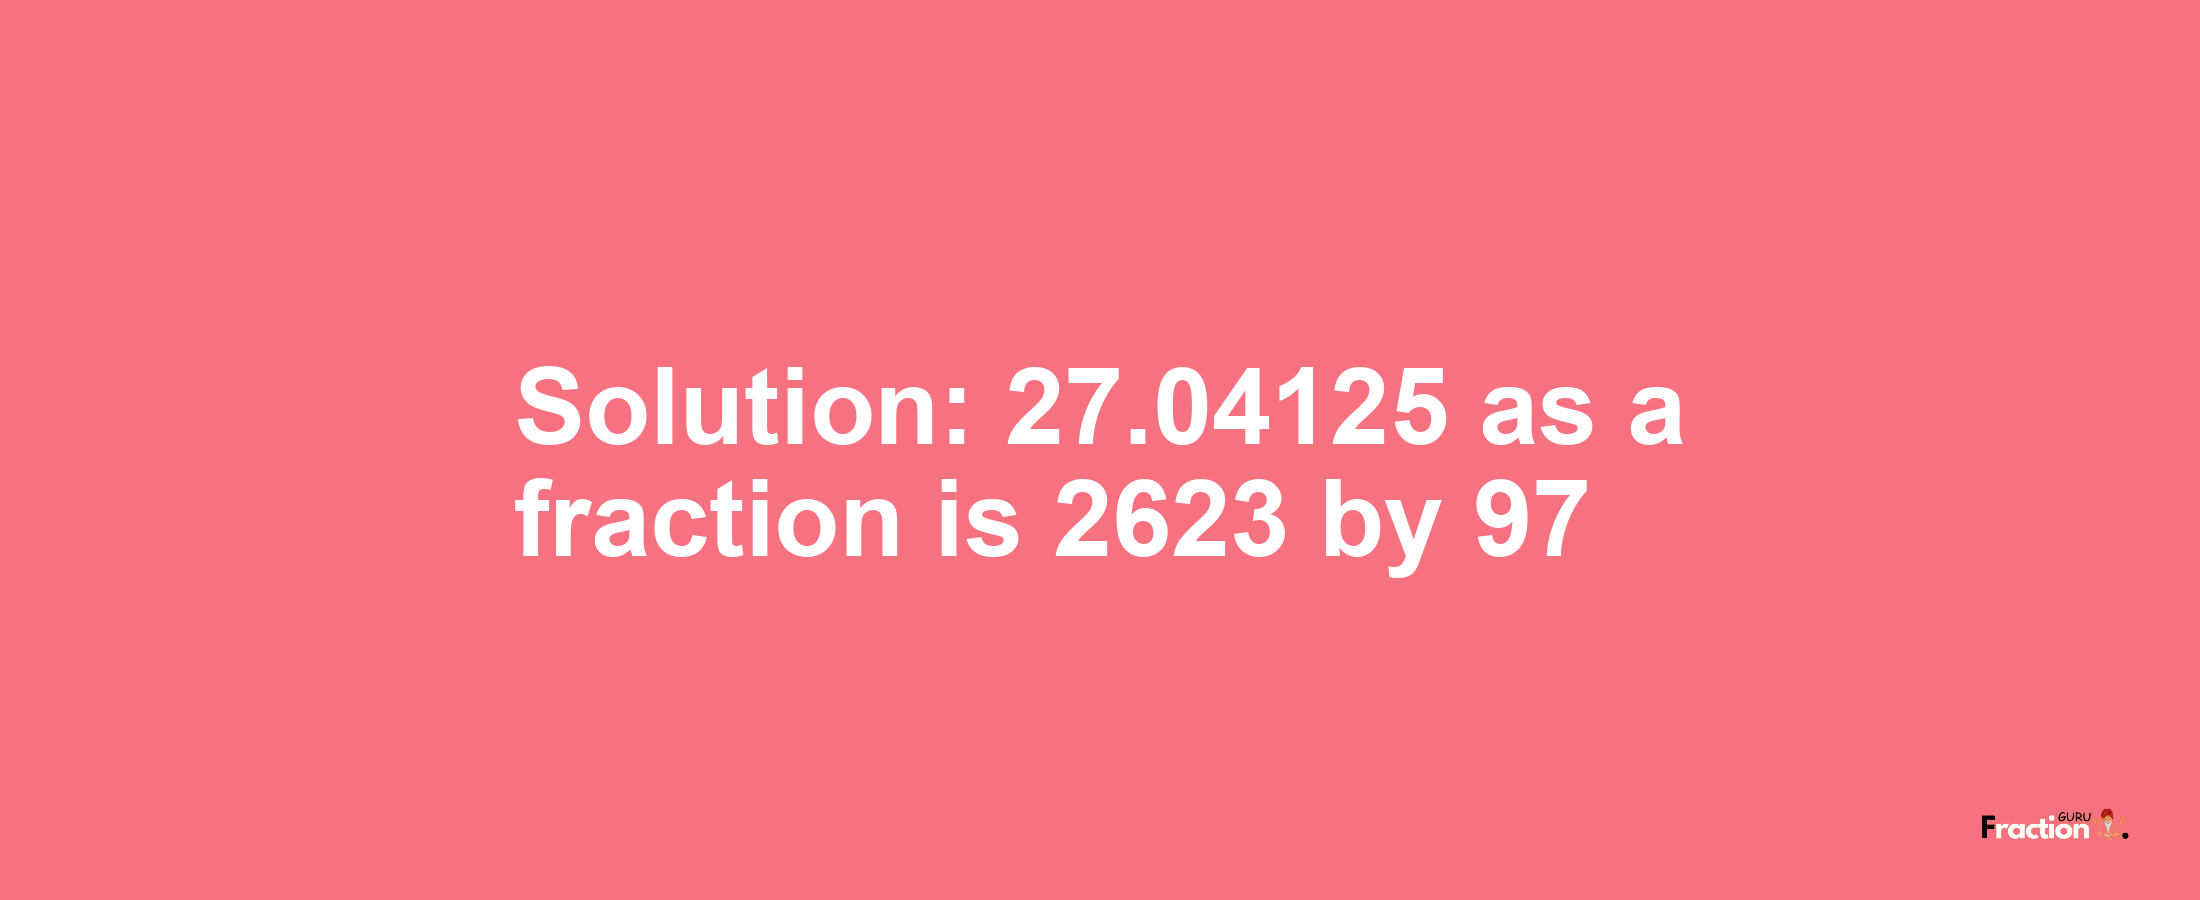 Solution:27.04125 as a fraction is 2623/97